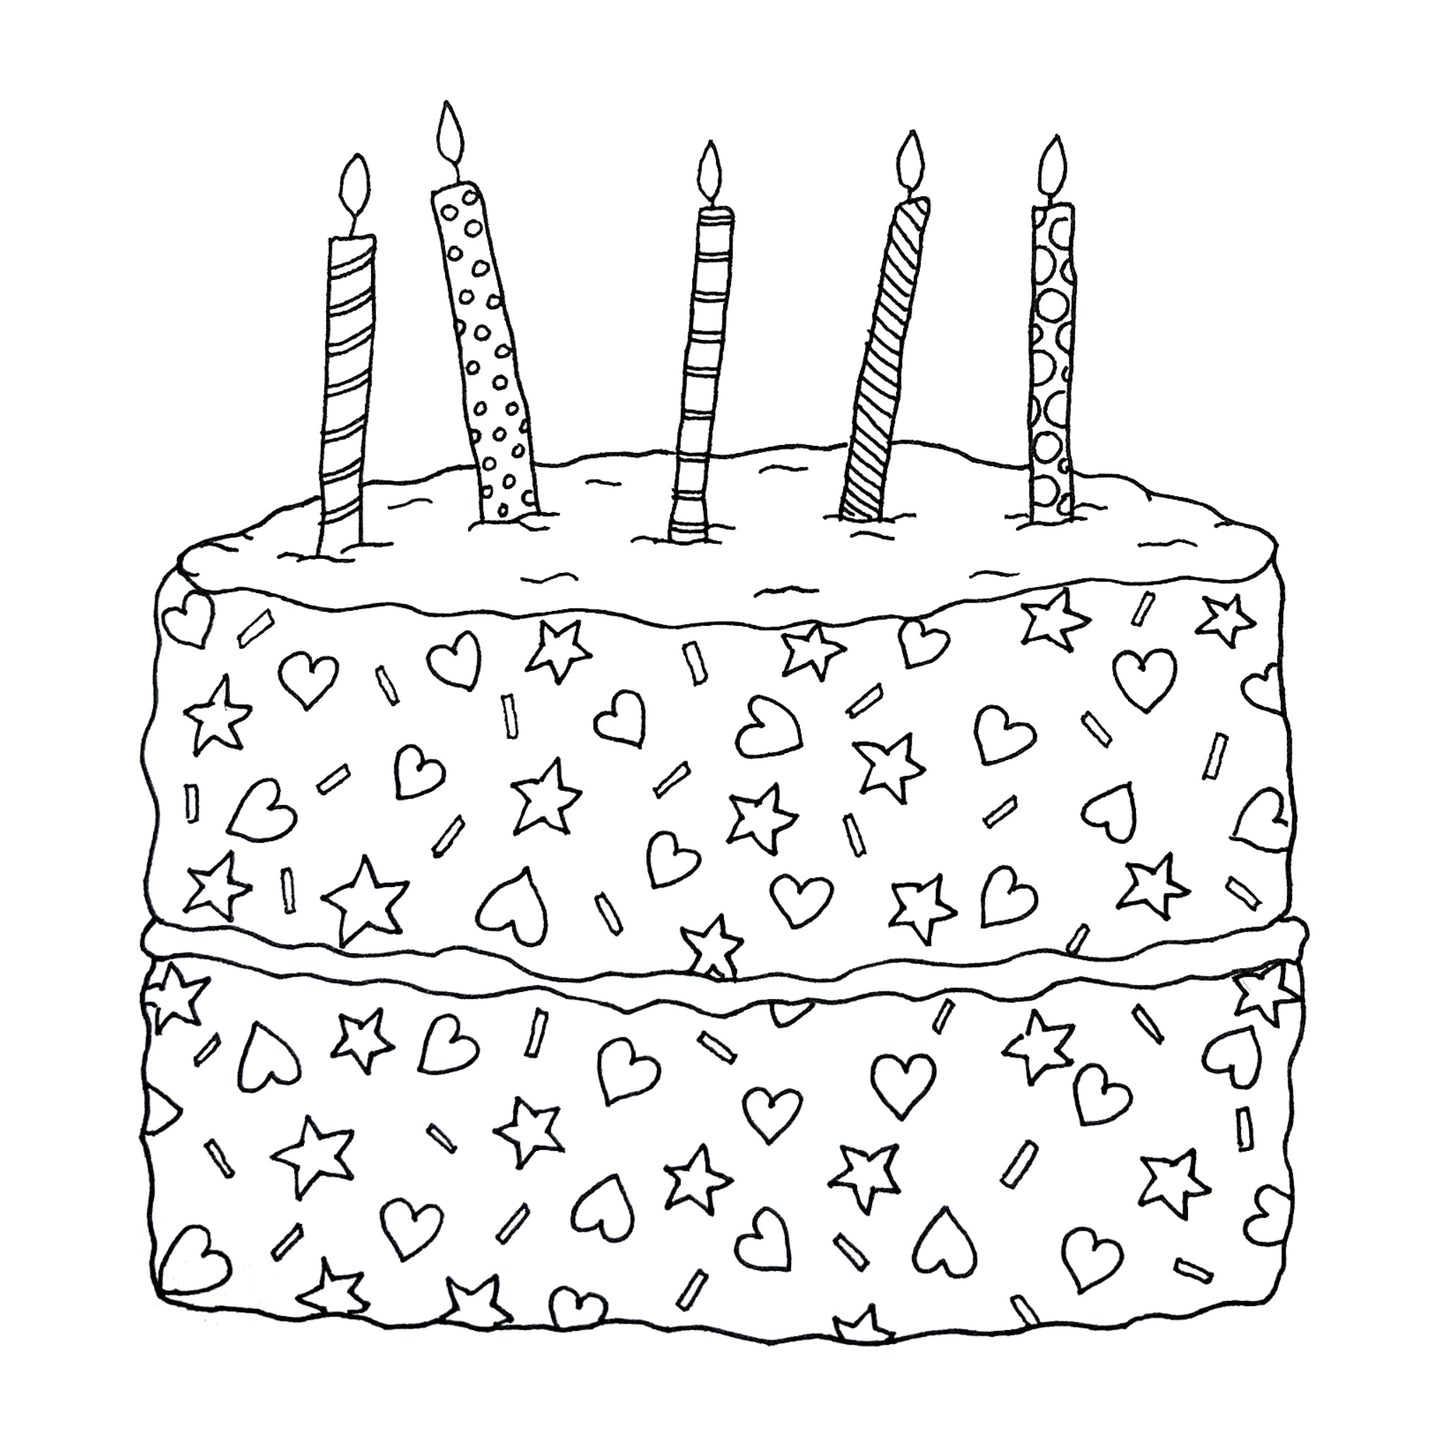 Illustration shows a 2 tier birthday cake made from sprinkles, hearts and stars with 5 candles made with stripes and dots. image is entirely black and white. 